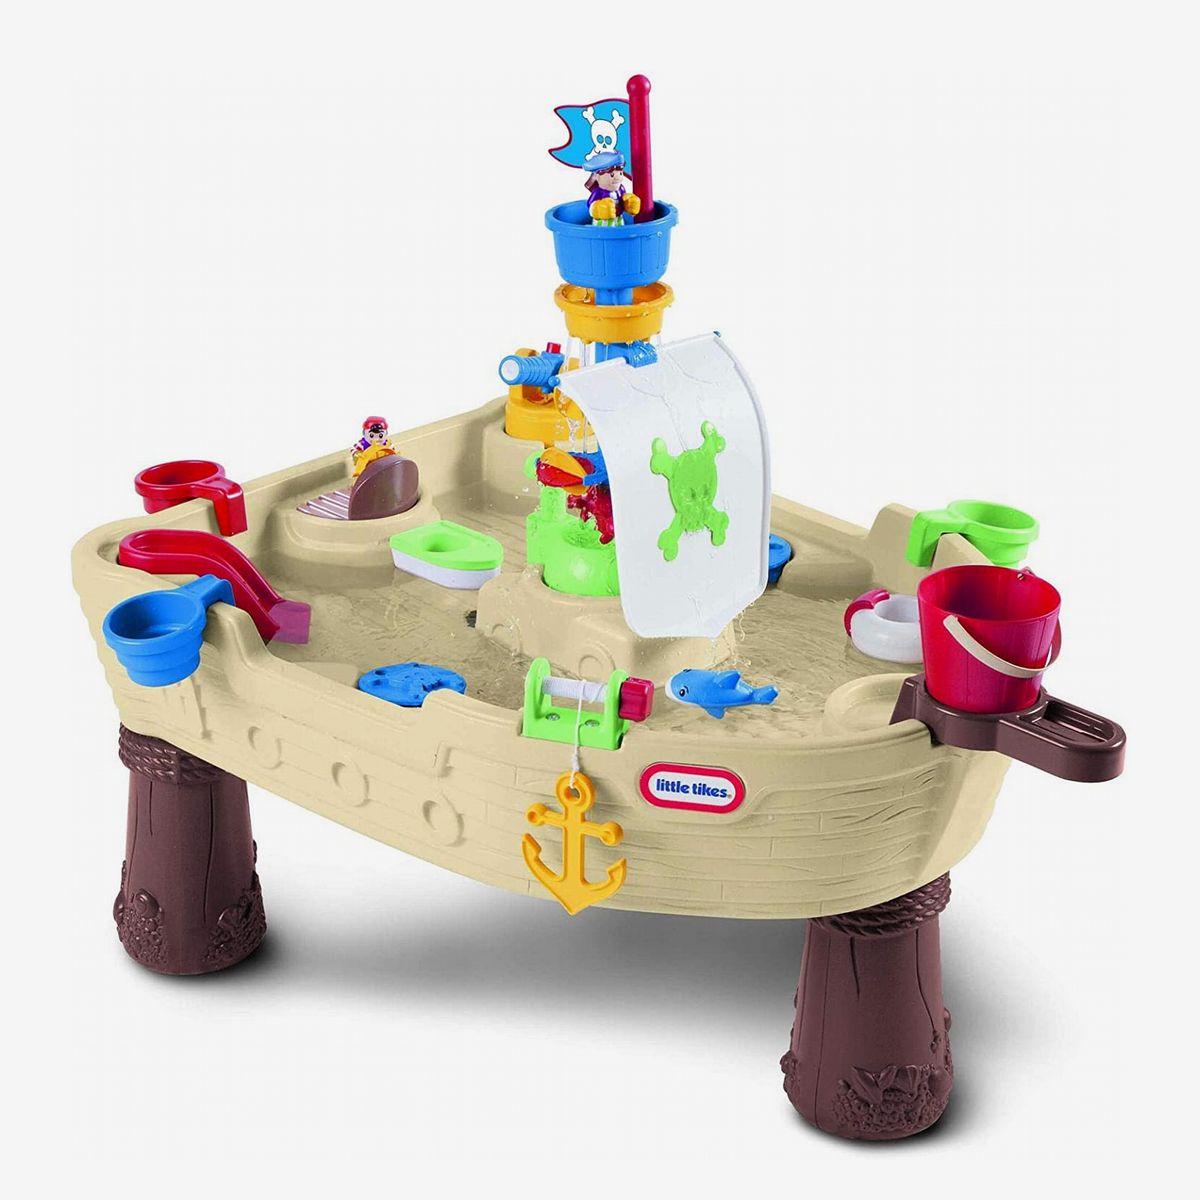 Sand and Water Table For Children Outdoor Play Fun UK Hot